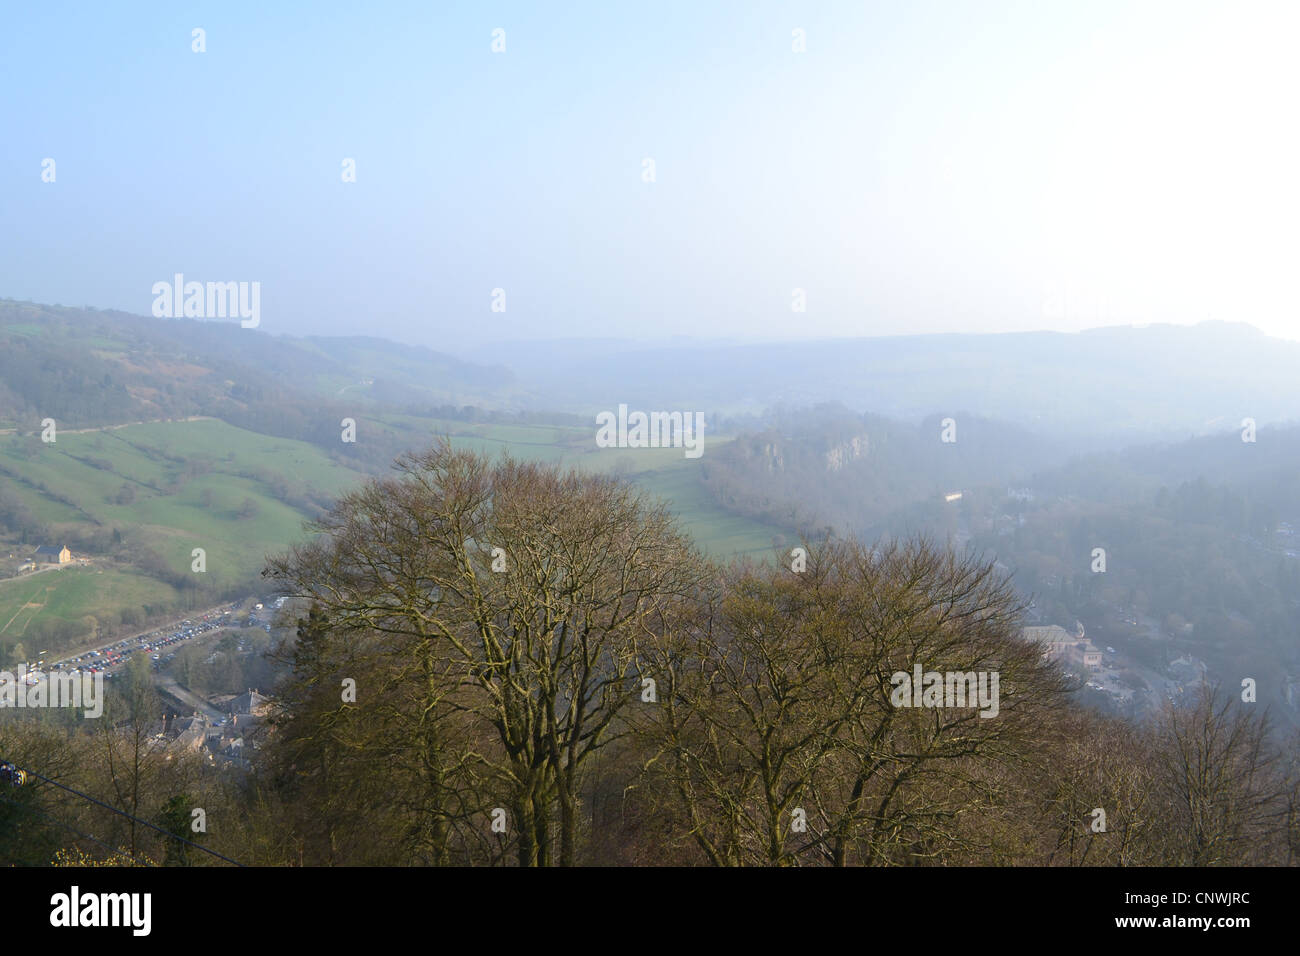 This image is of the landscape of Matlock Bath in Derbyshire Peak District area. Stock Photo